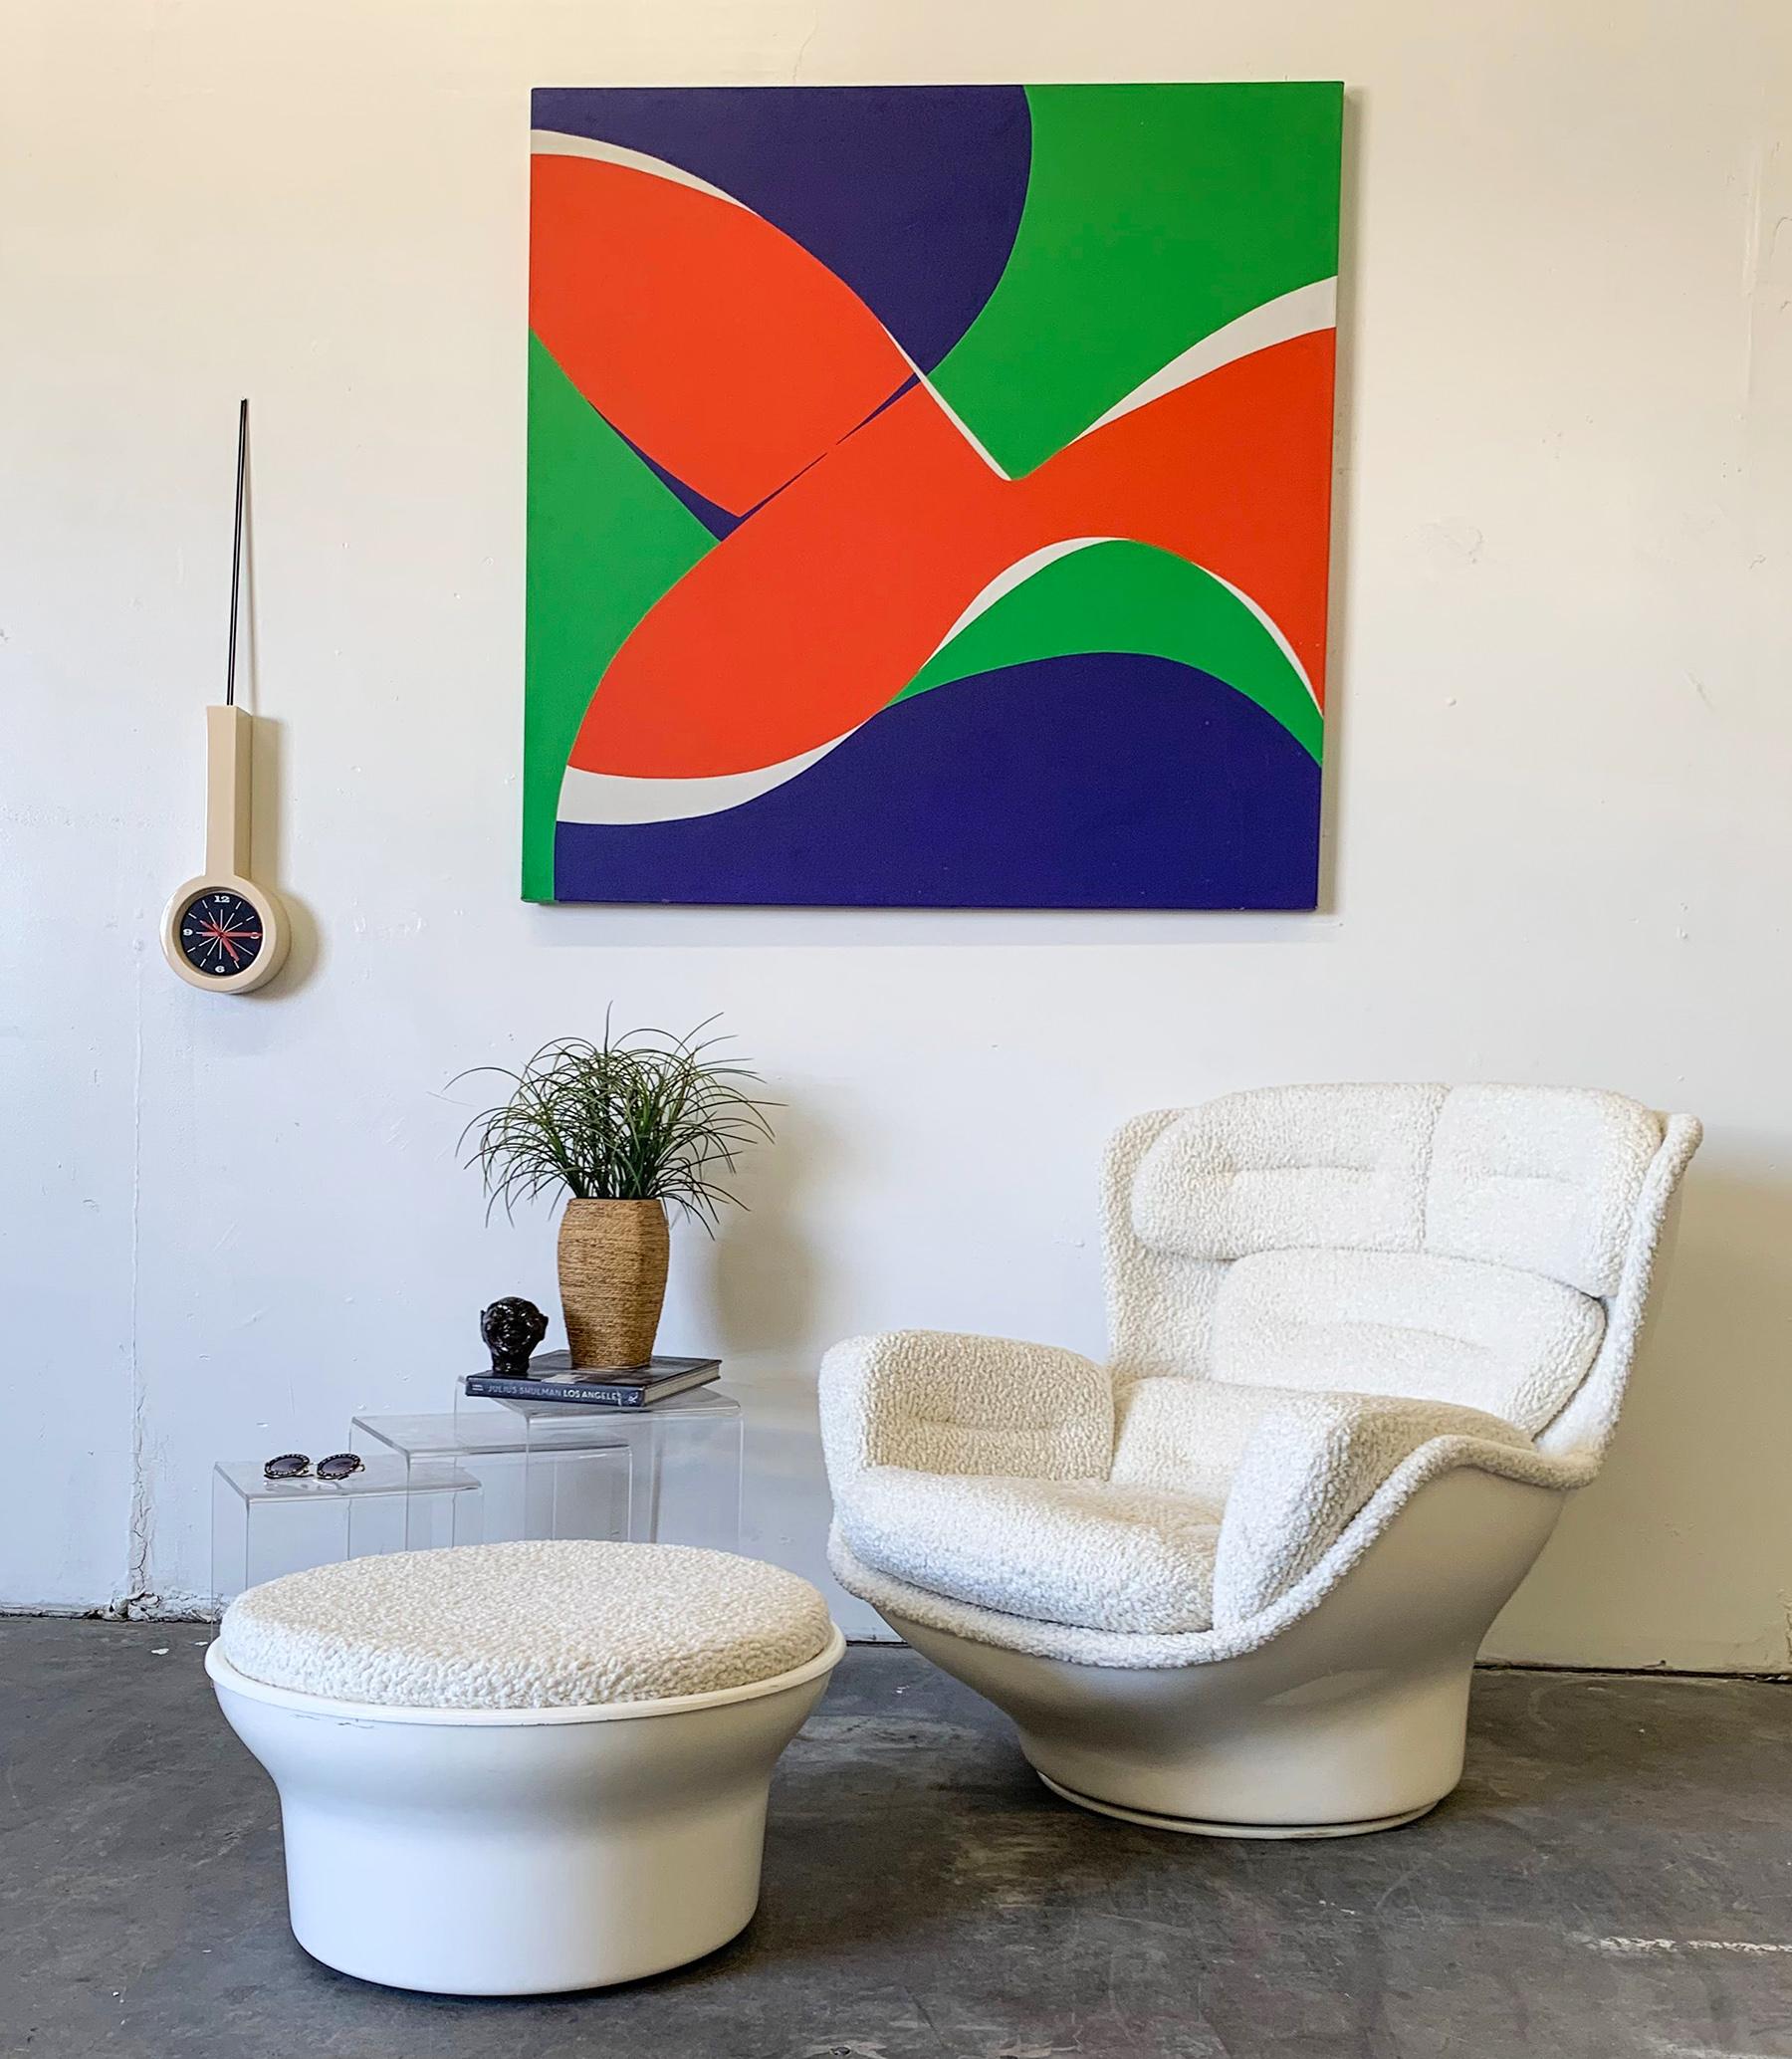 This gorgeous chair is the brainchild of our gallery. After picking up a 1970s Space Age fiberglass chair designed by Michel Cadestin Karate chair, we couldn't help but notice how sloppy the vintage vinyl button tufted upholstery was. We then